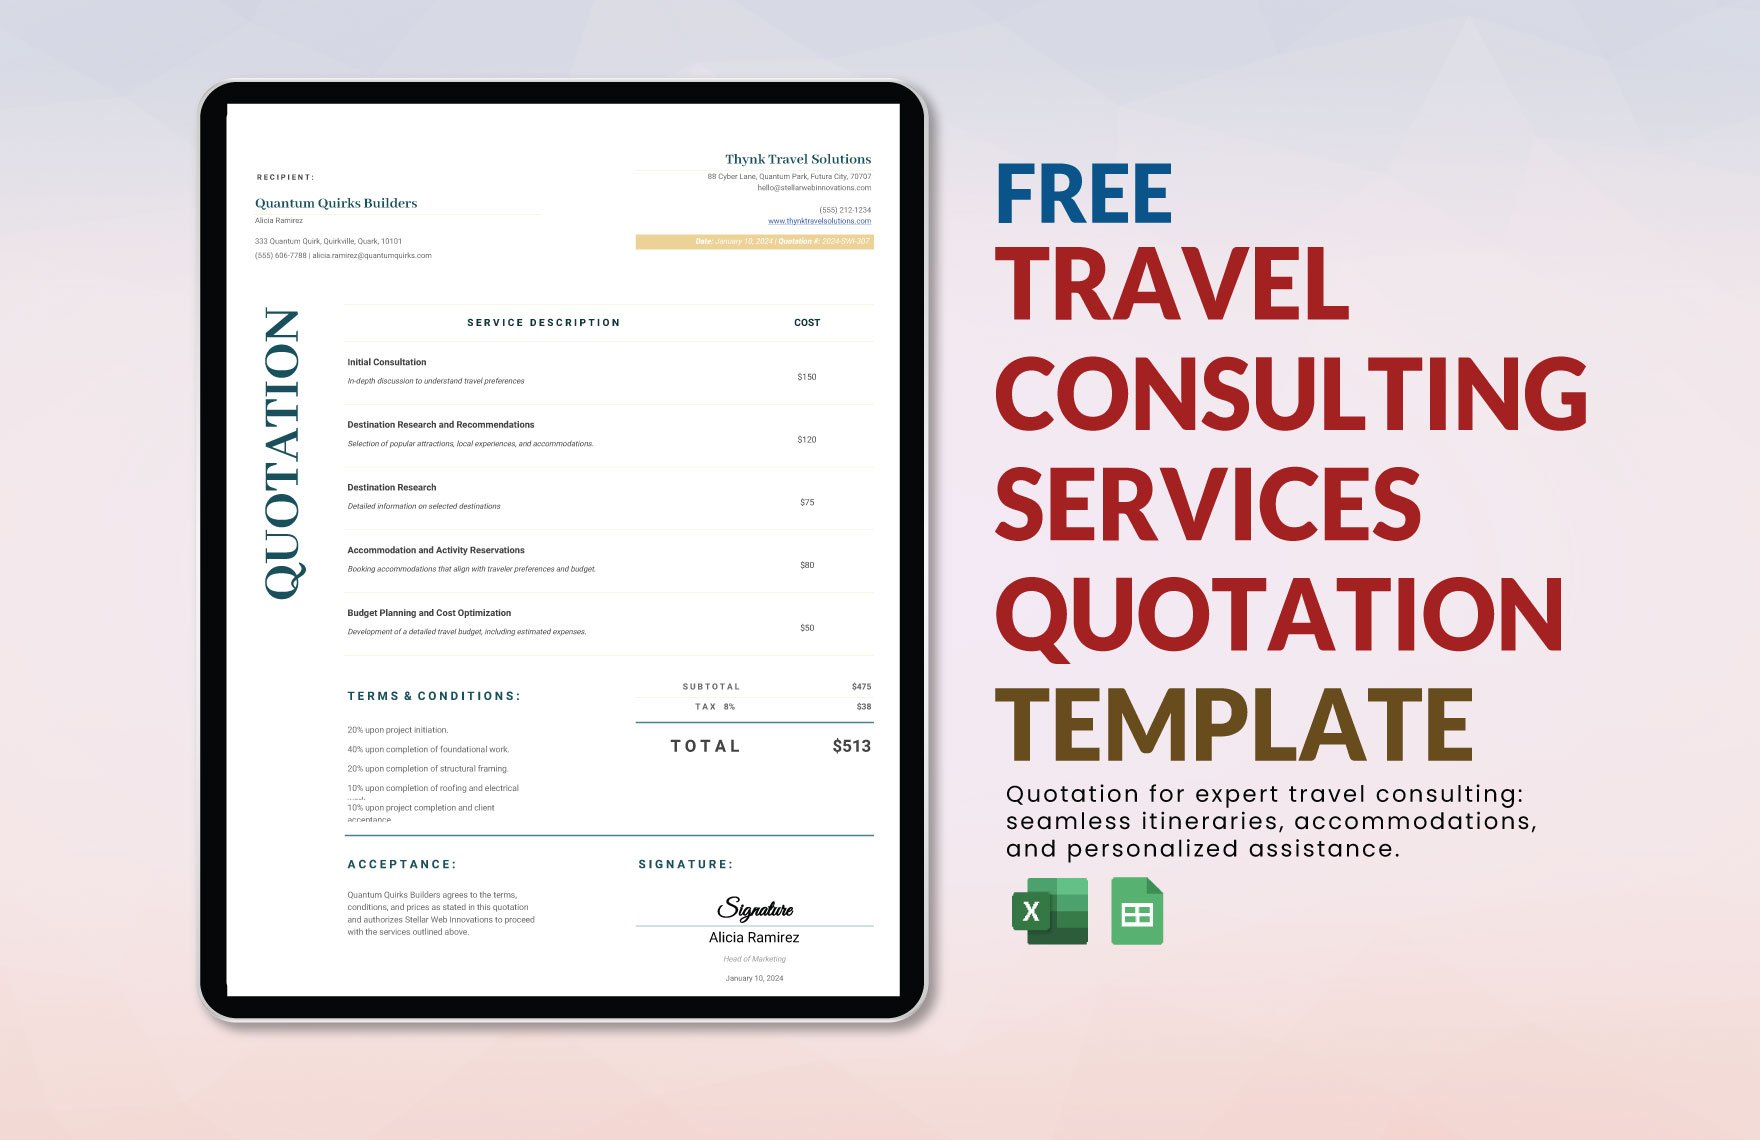 Travel Consulting Services Quotation Template